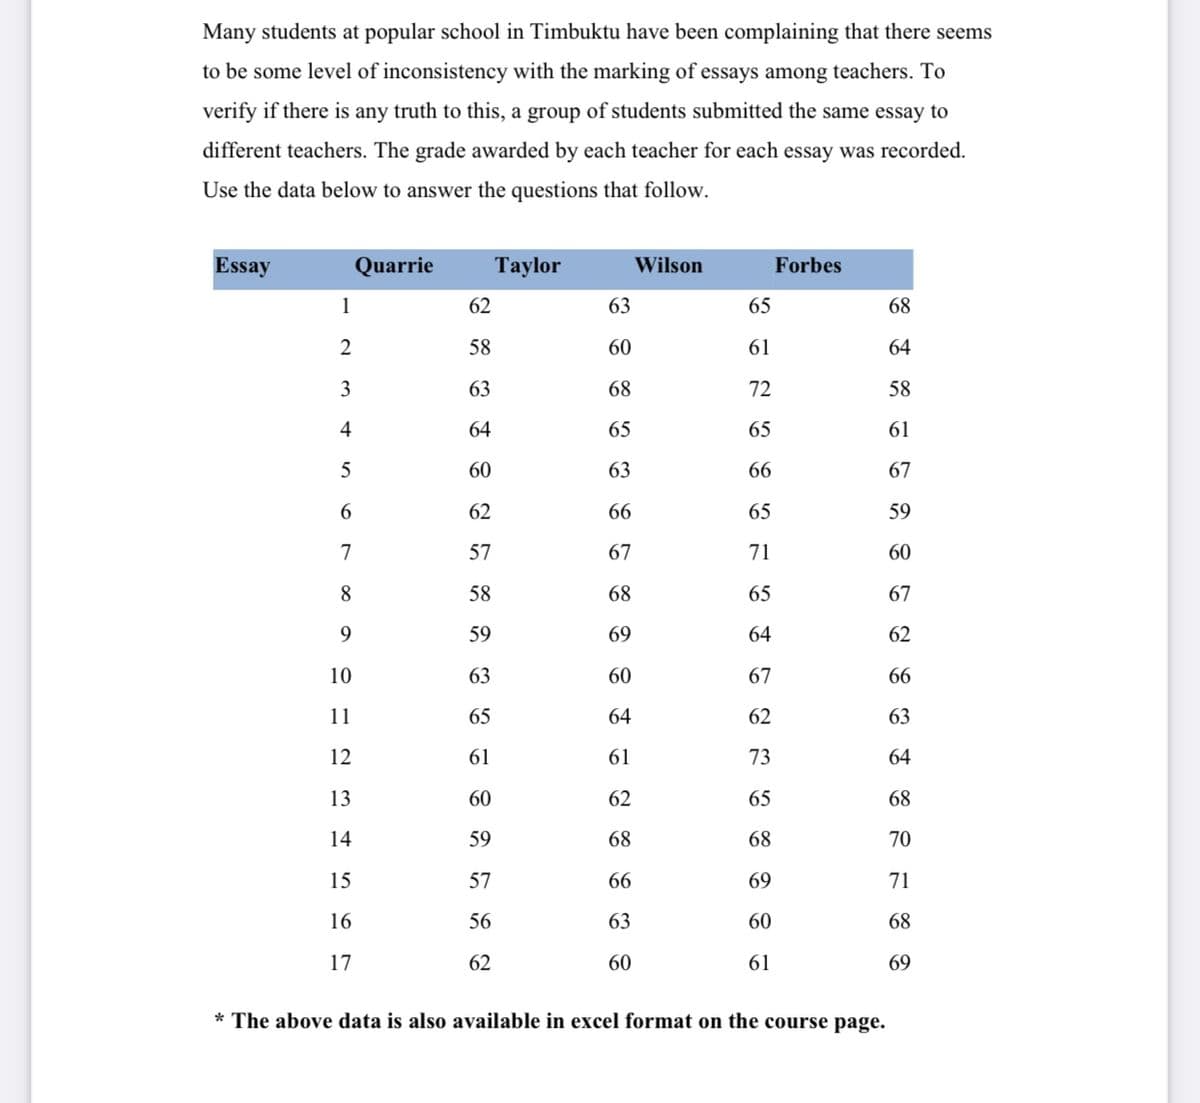 Many students at popular school in Timbuktu have been complaining that there seems
to be some level of inconsistency with the marking of essays among teachers. To
verify if there is any truth to this, a group of students submitted the same essay to
different teachers. The grade awarded by each teacher for each essay was recorded.
Use the data below to answer the questions that follow.
Essay
Quarrie
Taylor
Wilson
Forbes
1
62
63
65
68
58
60
61
64
3
63
68
72
58
4
64
65
65
61
60
63
66
67
6.
62
66
65
59
7
57
67
71
60
8.
58
68
65
67
9.
59
69
64
62
10
63
60
67
66
11
65
64
62
63
12
61
61
73
64
13
60
62
65
68
14
59
68
68
70
15
57
66
69
71
16
56
63
60
68
17
62
60
61
69
* The above data is also available in excel format on the course page.
